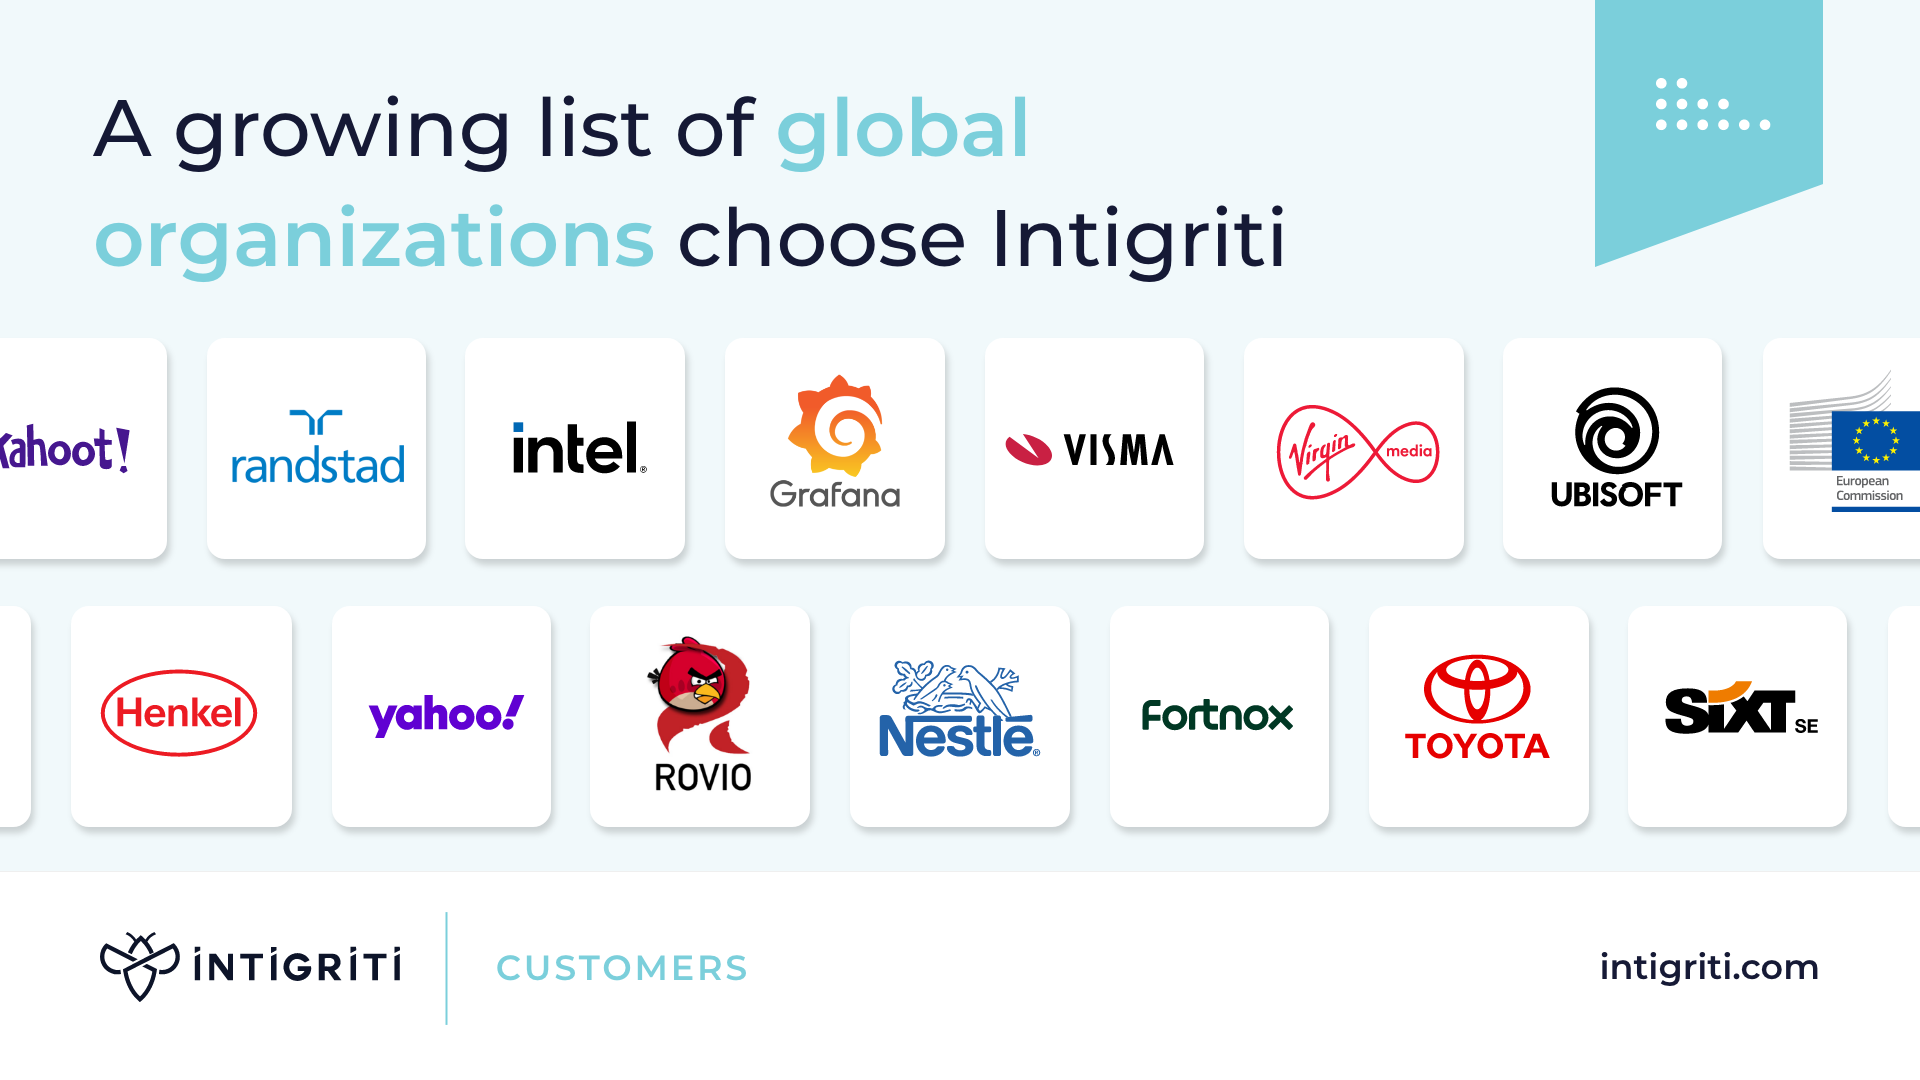 Leading global organizations have partnered with Intigriti for bug bounty and other crowdsourced security services, including Intel, the European Commission, Yahoo!, and many more.